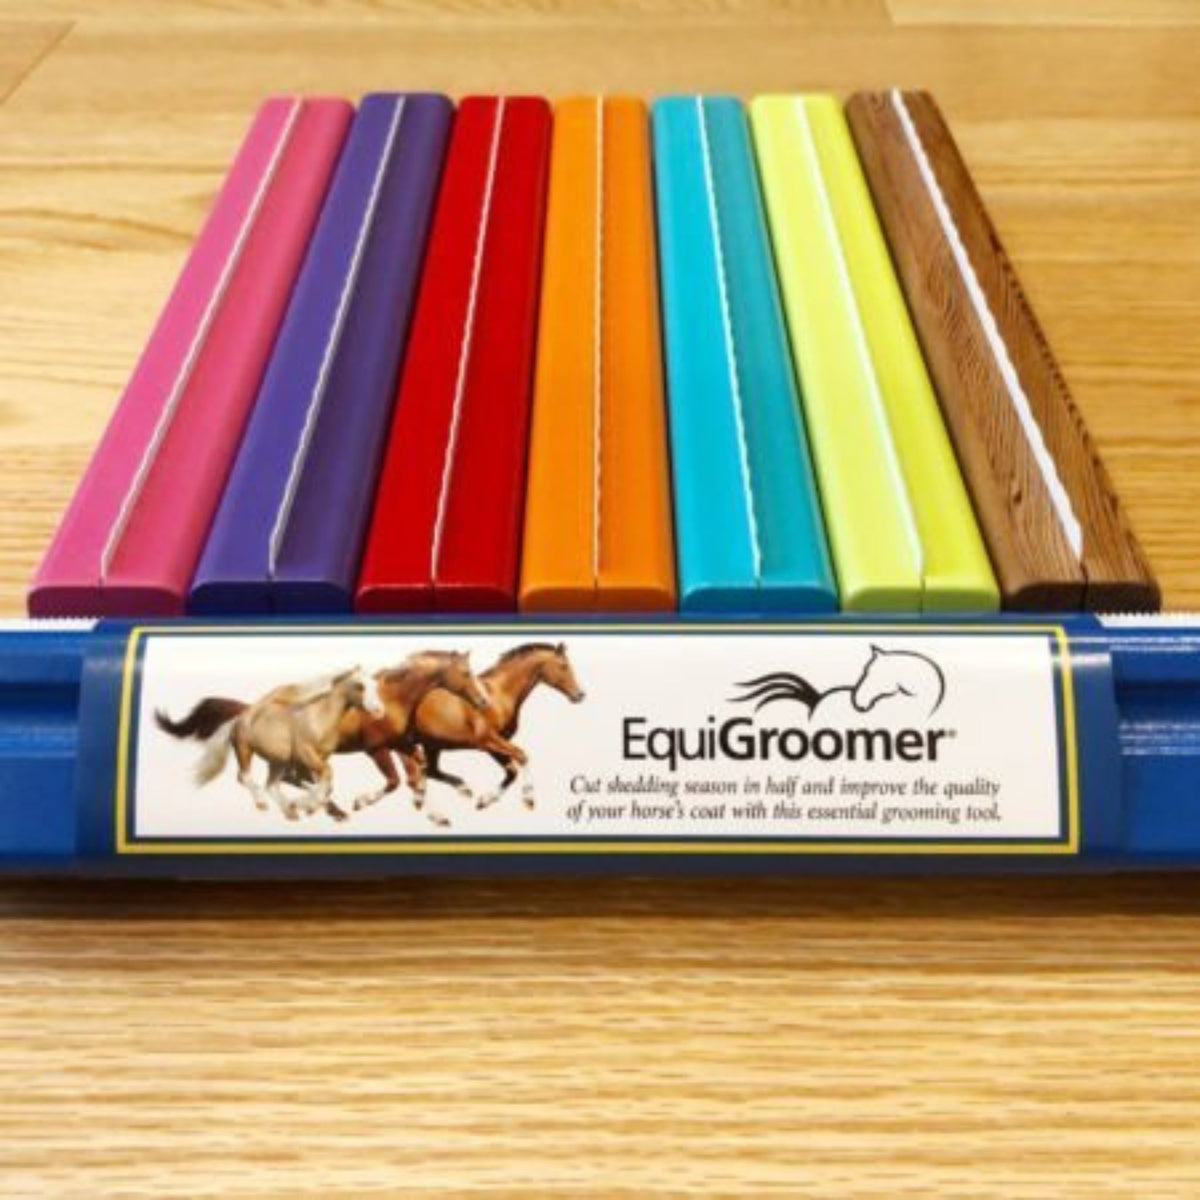 Aligned equigroomers of varying colours, with one showing a white wrapped label.